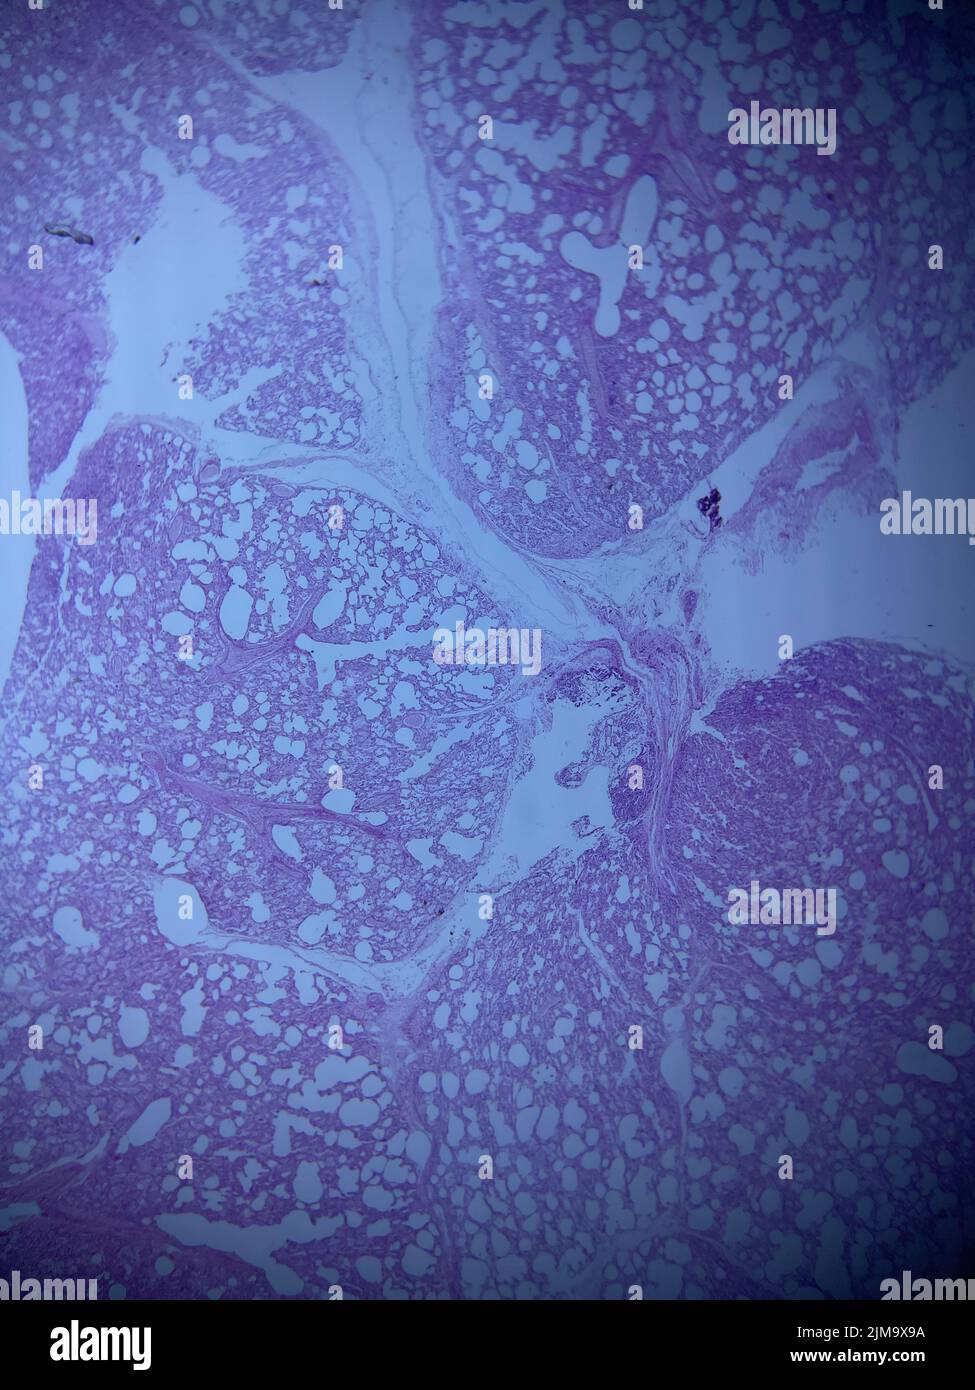 Lung tissue histology in the mobile microscopic view. H and E staining. Pink purple color. Neutrophil infiltration with a background of pneumonia. Stock Photo